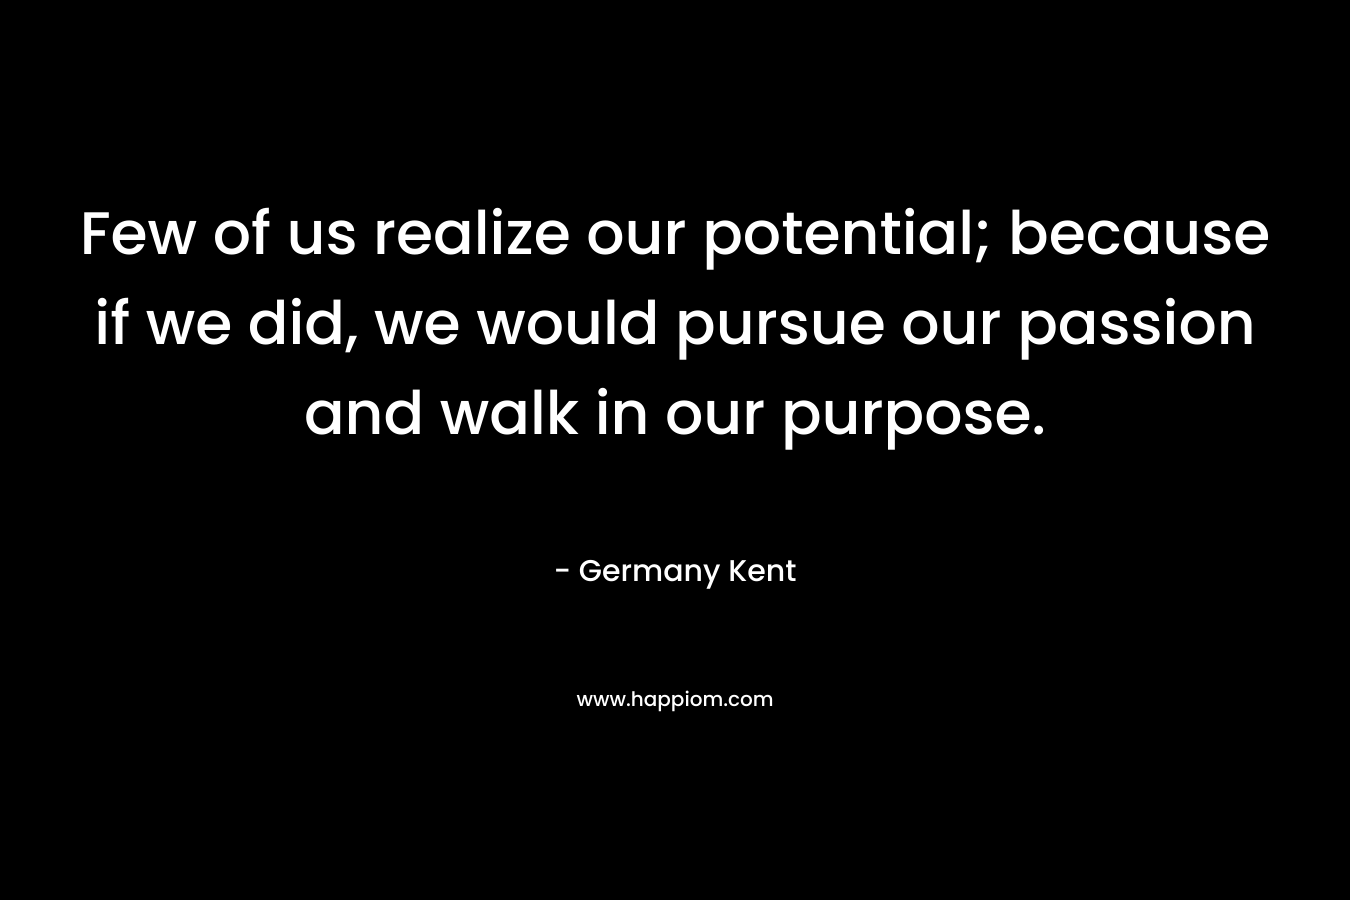 Few of us realize our potential; because if we did, we would pursue our passion and walk in our purpose.